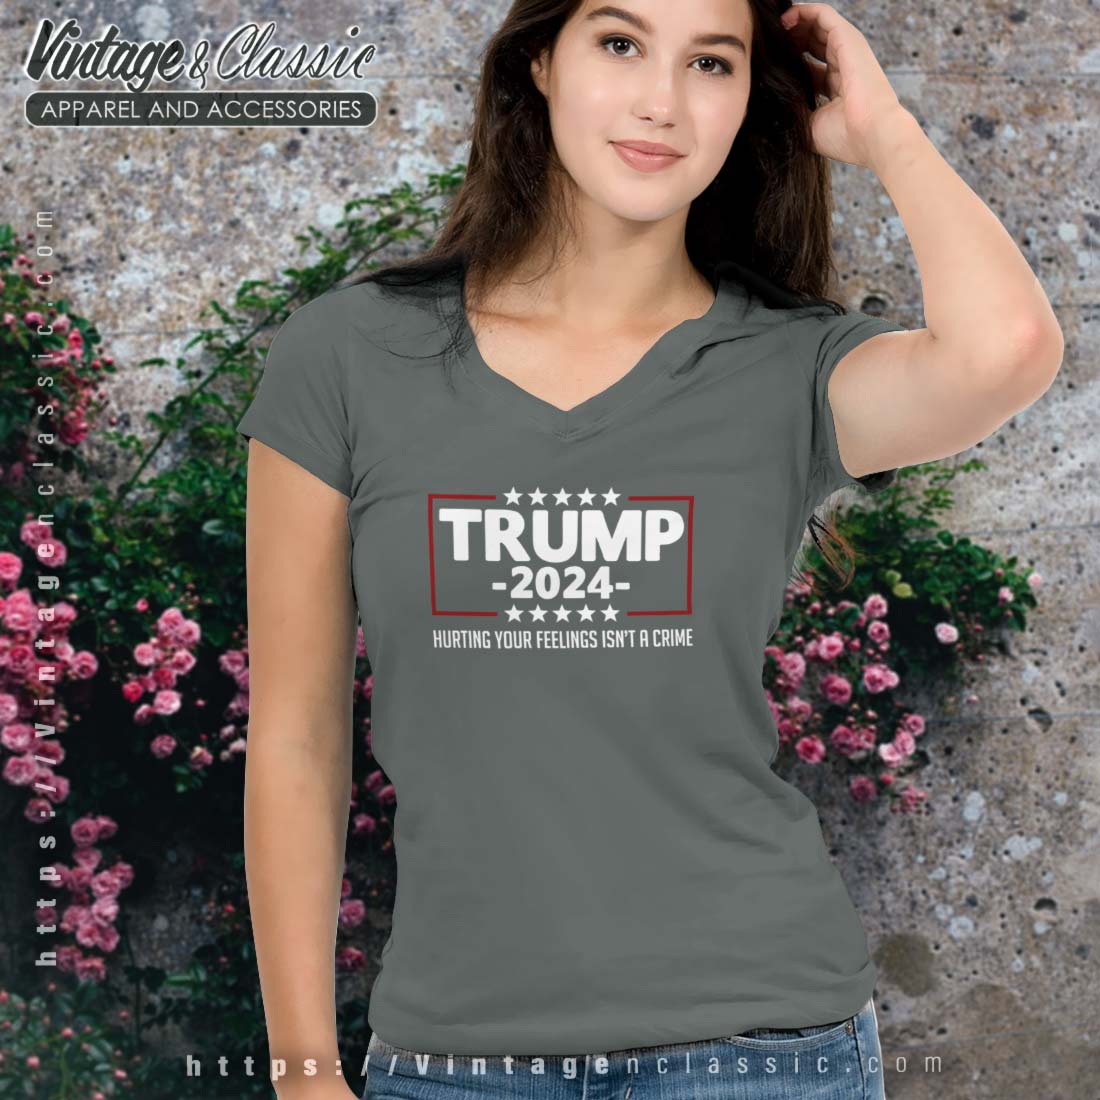 Hurting Your Feelings Isnt A Crime Trump 2024 Shirt - Vintagenclassic Tee